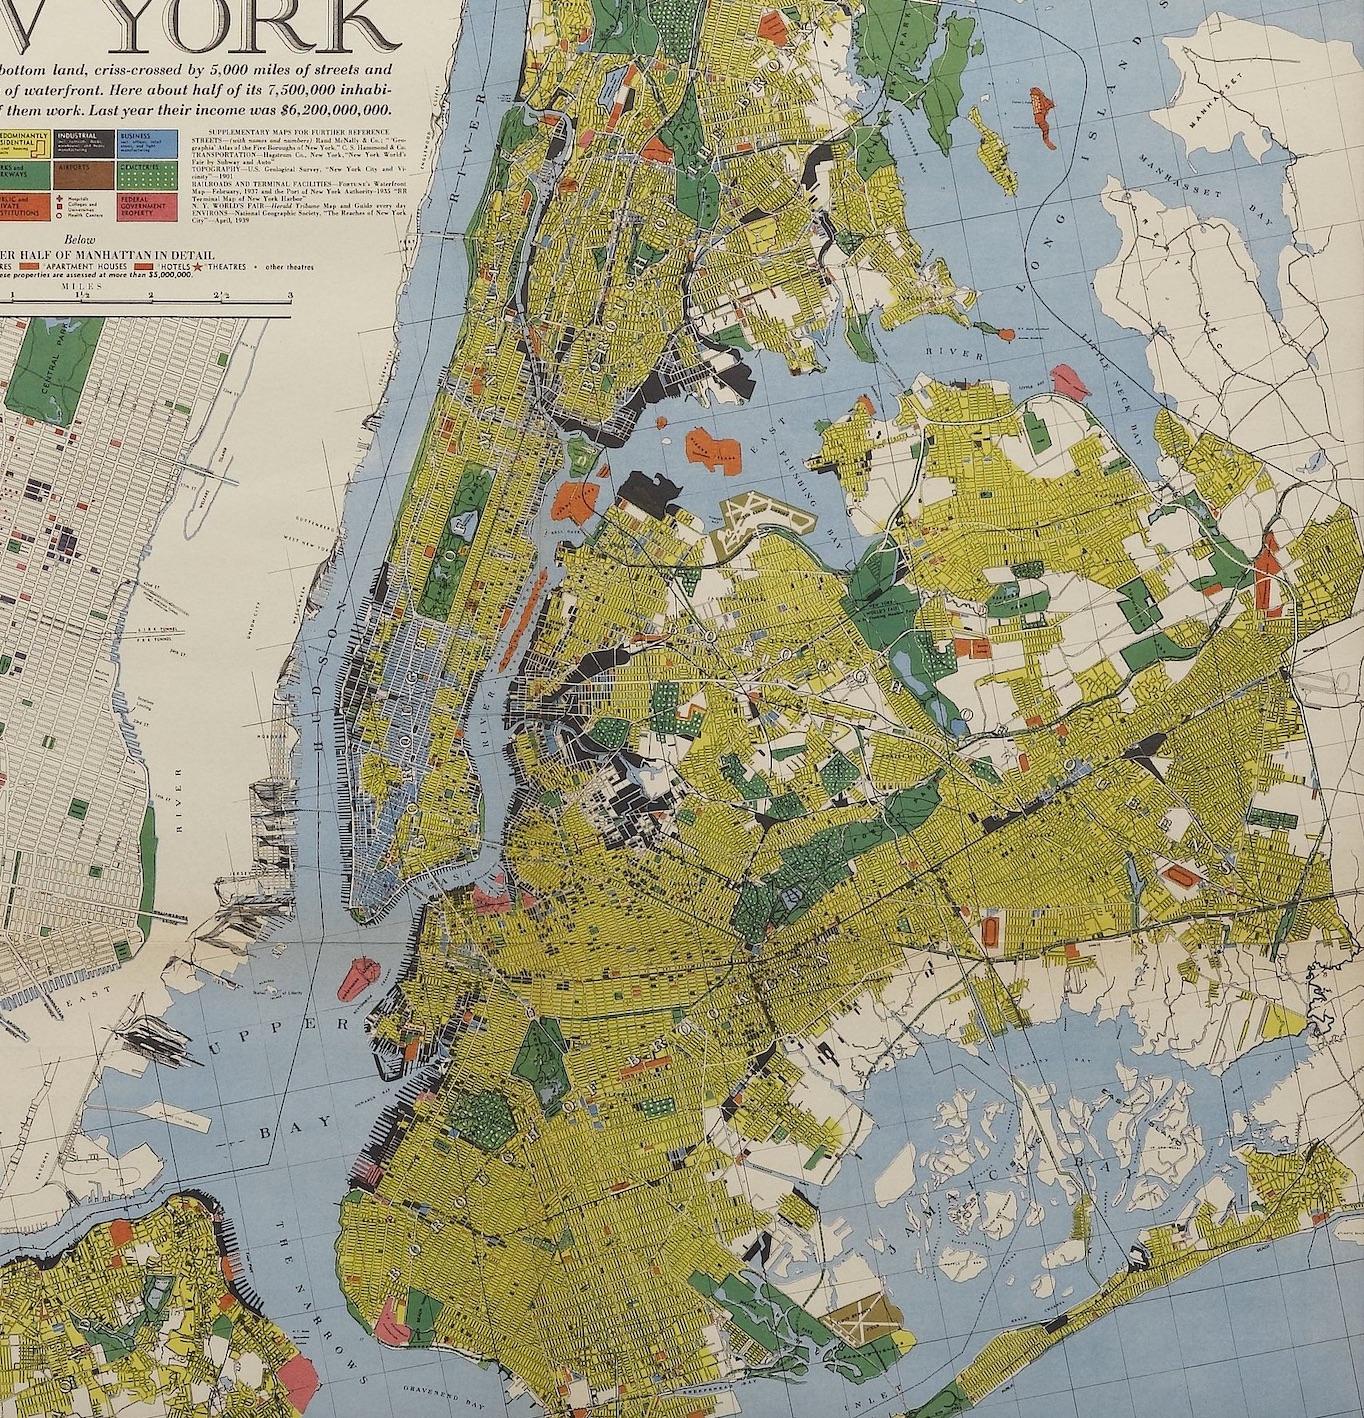 This 1939 Richard Edes Harrison map of New York City, published for an issue of Fortune Magazine, represents a triumph of the visual display of quantitative information. Its aesthetic impact is all the more impressive in its clear expression of